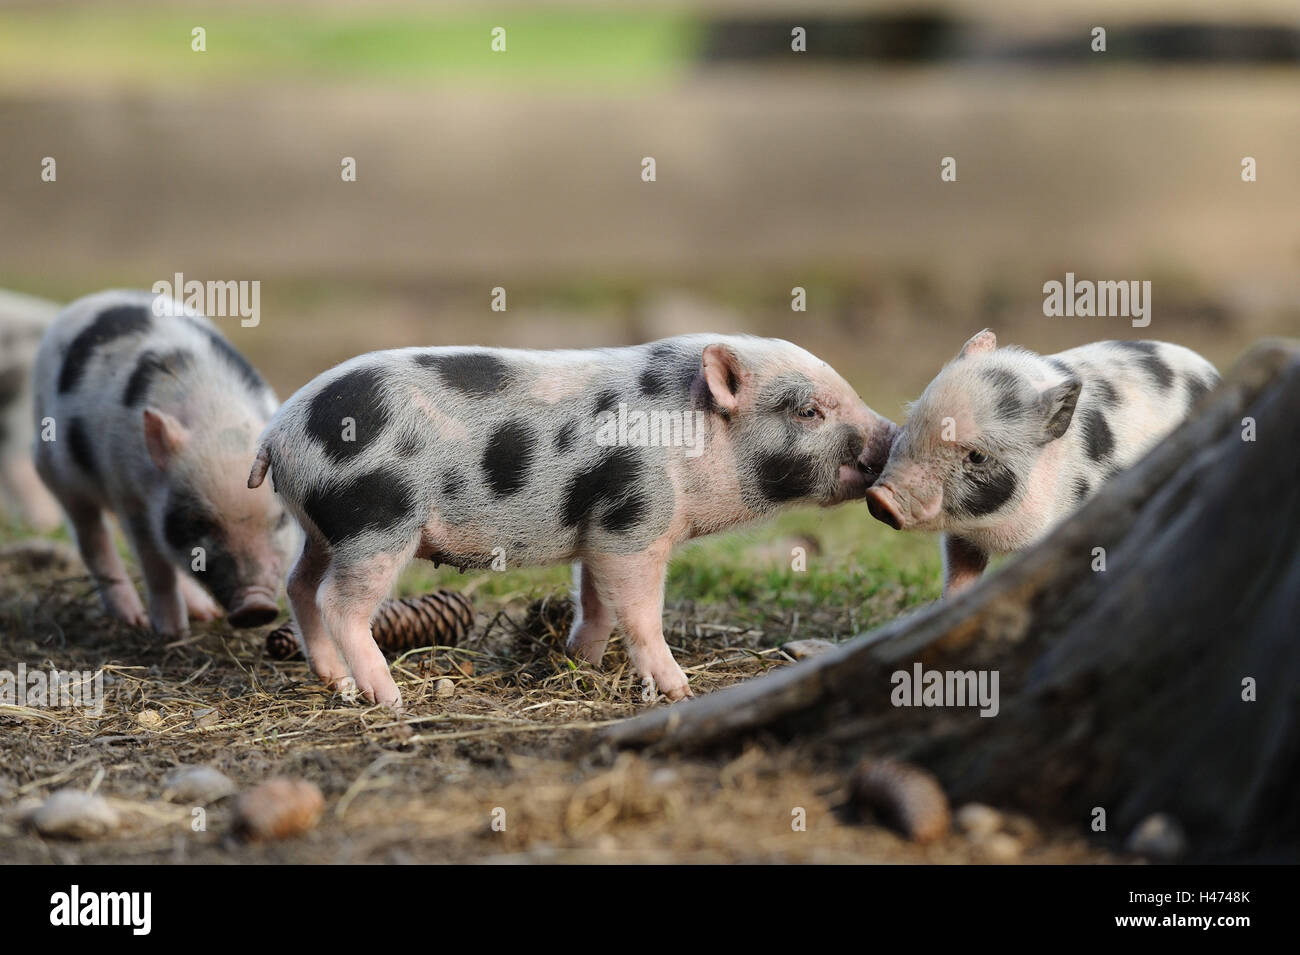 Pot-bellied pigs, piglets, side view, fighting, Stock Photo